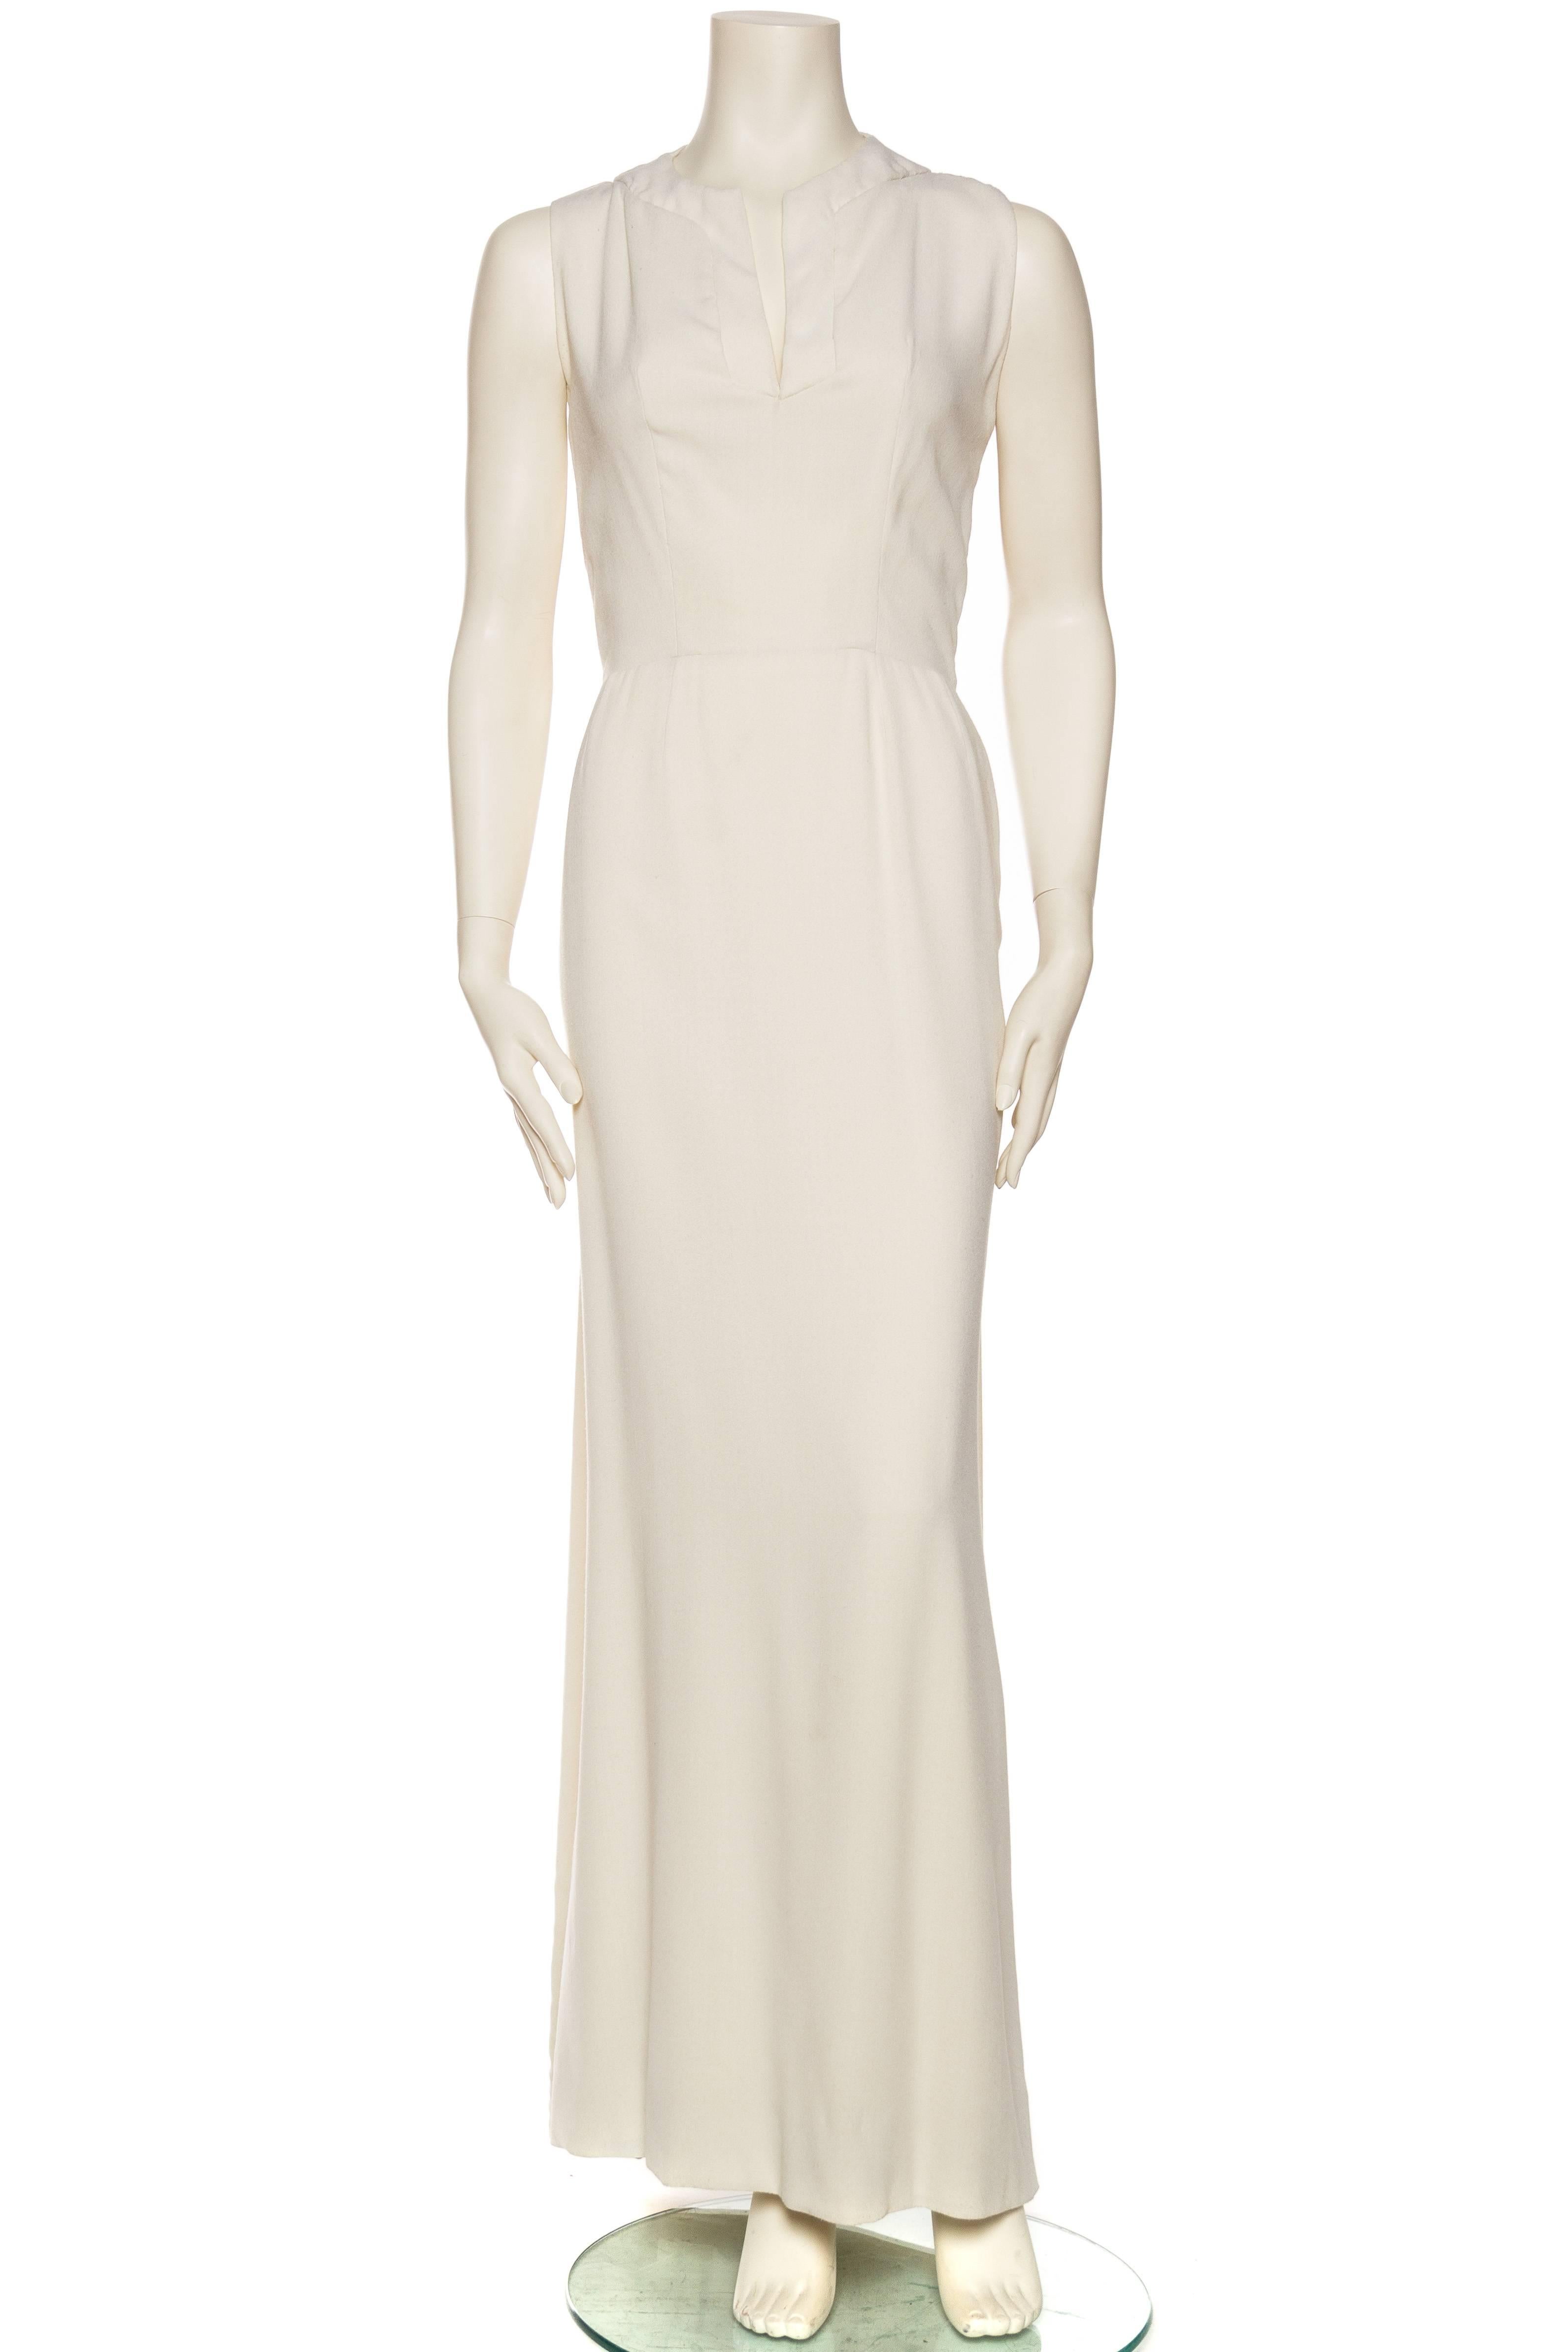 1960S PIERRE BALMAIN Off White Rayon & Silk Crepe Modernist Gown With Draped Back Train